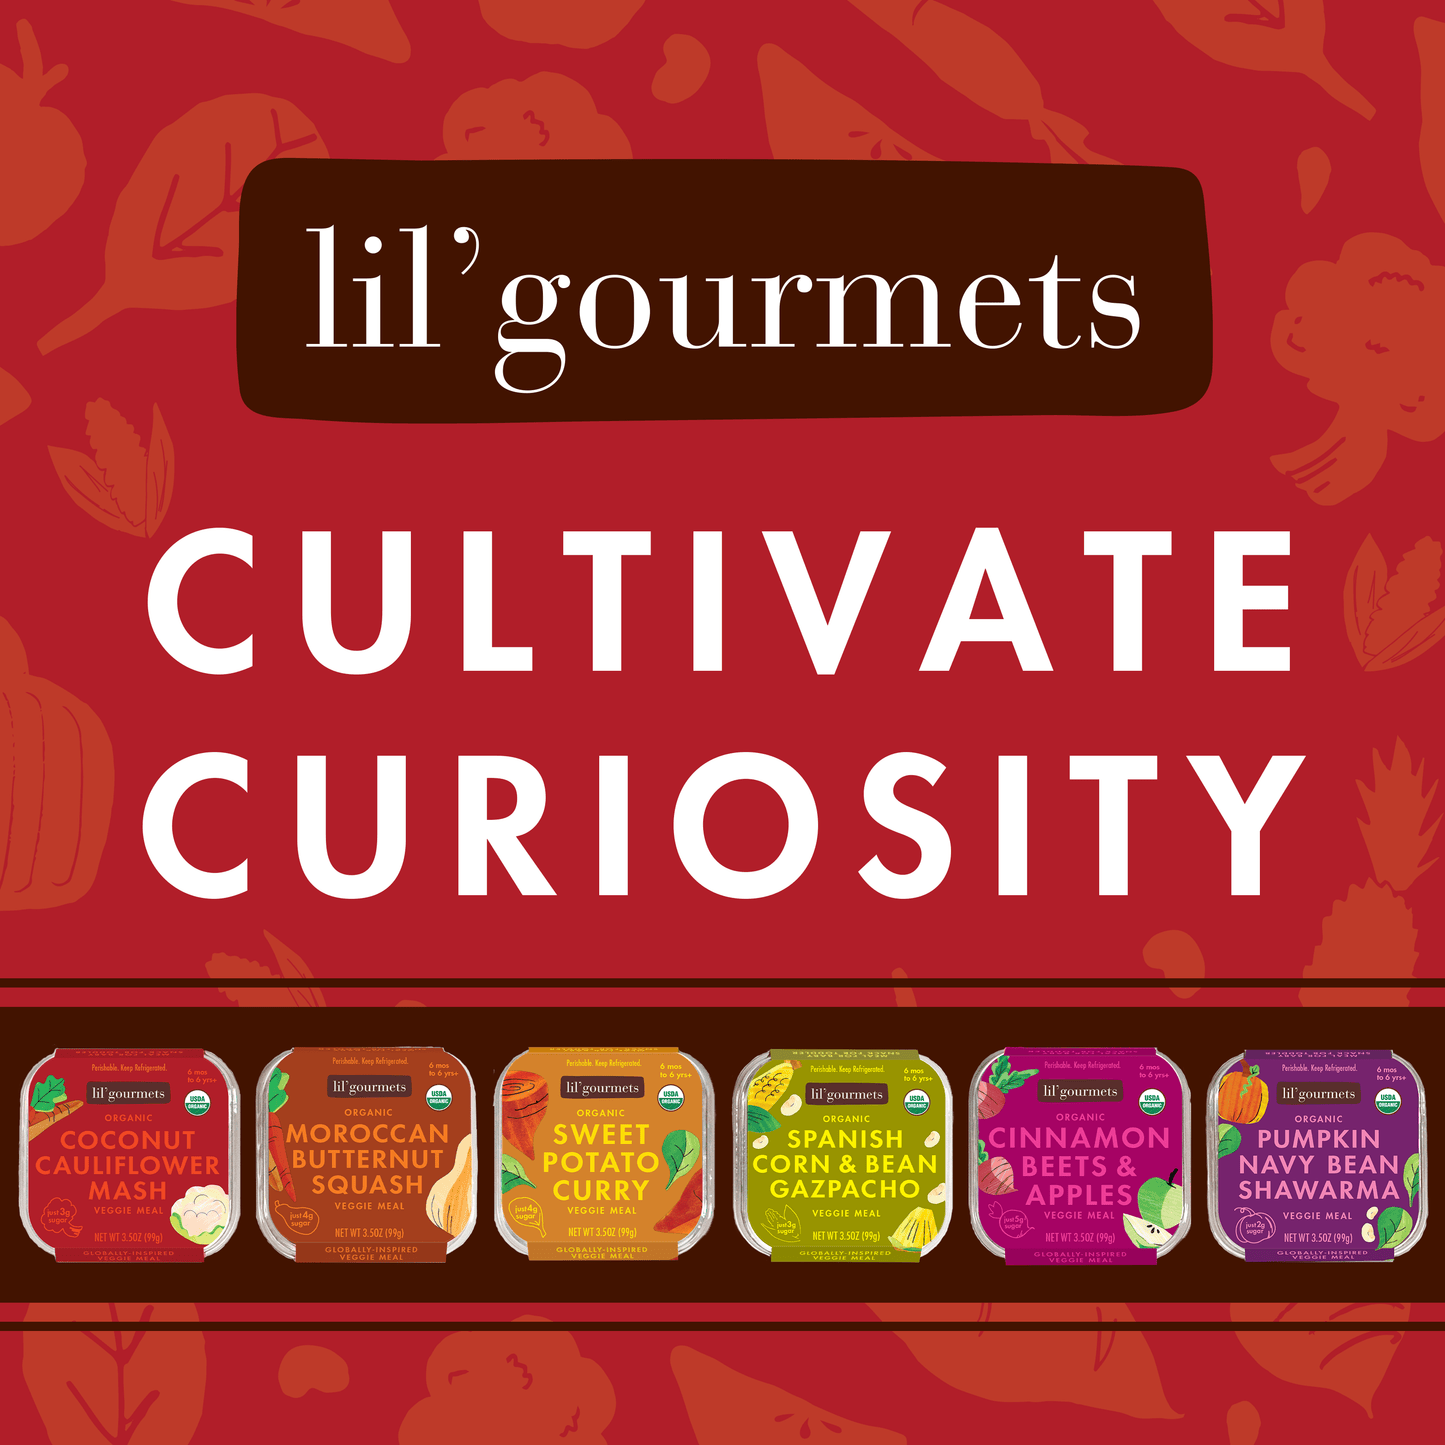 Introducing our lil’gourmets mission: to Cultivate Curiosity! - lil'gourmets